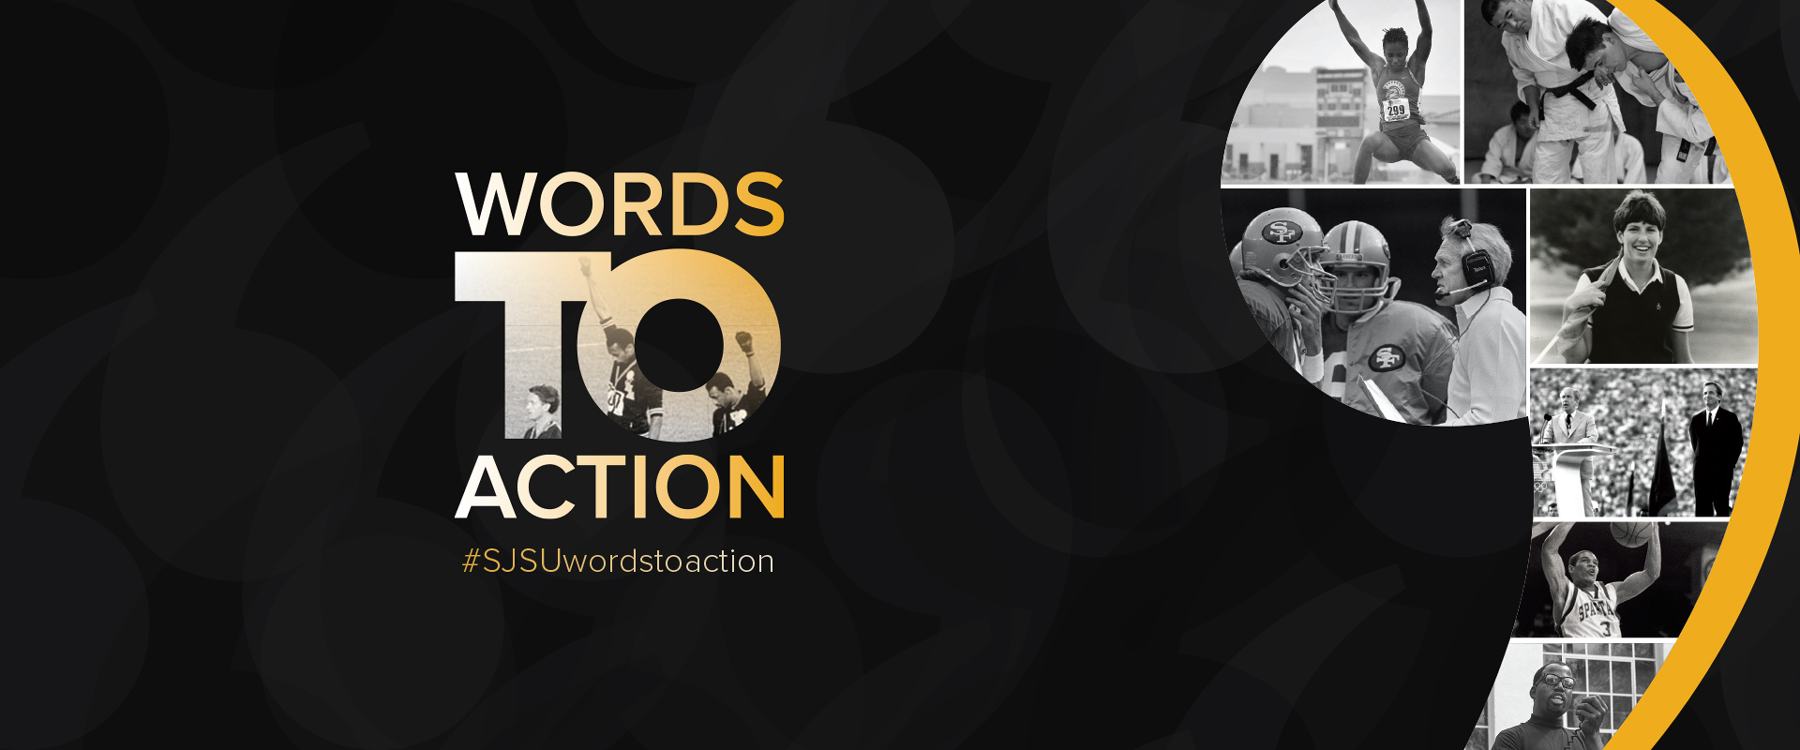 words to action text with various images of athletes on side